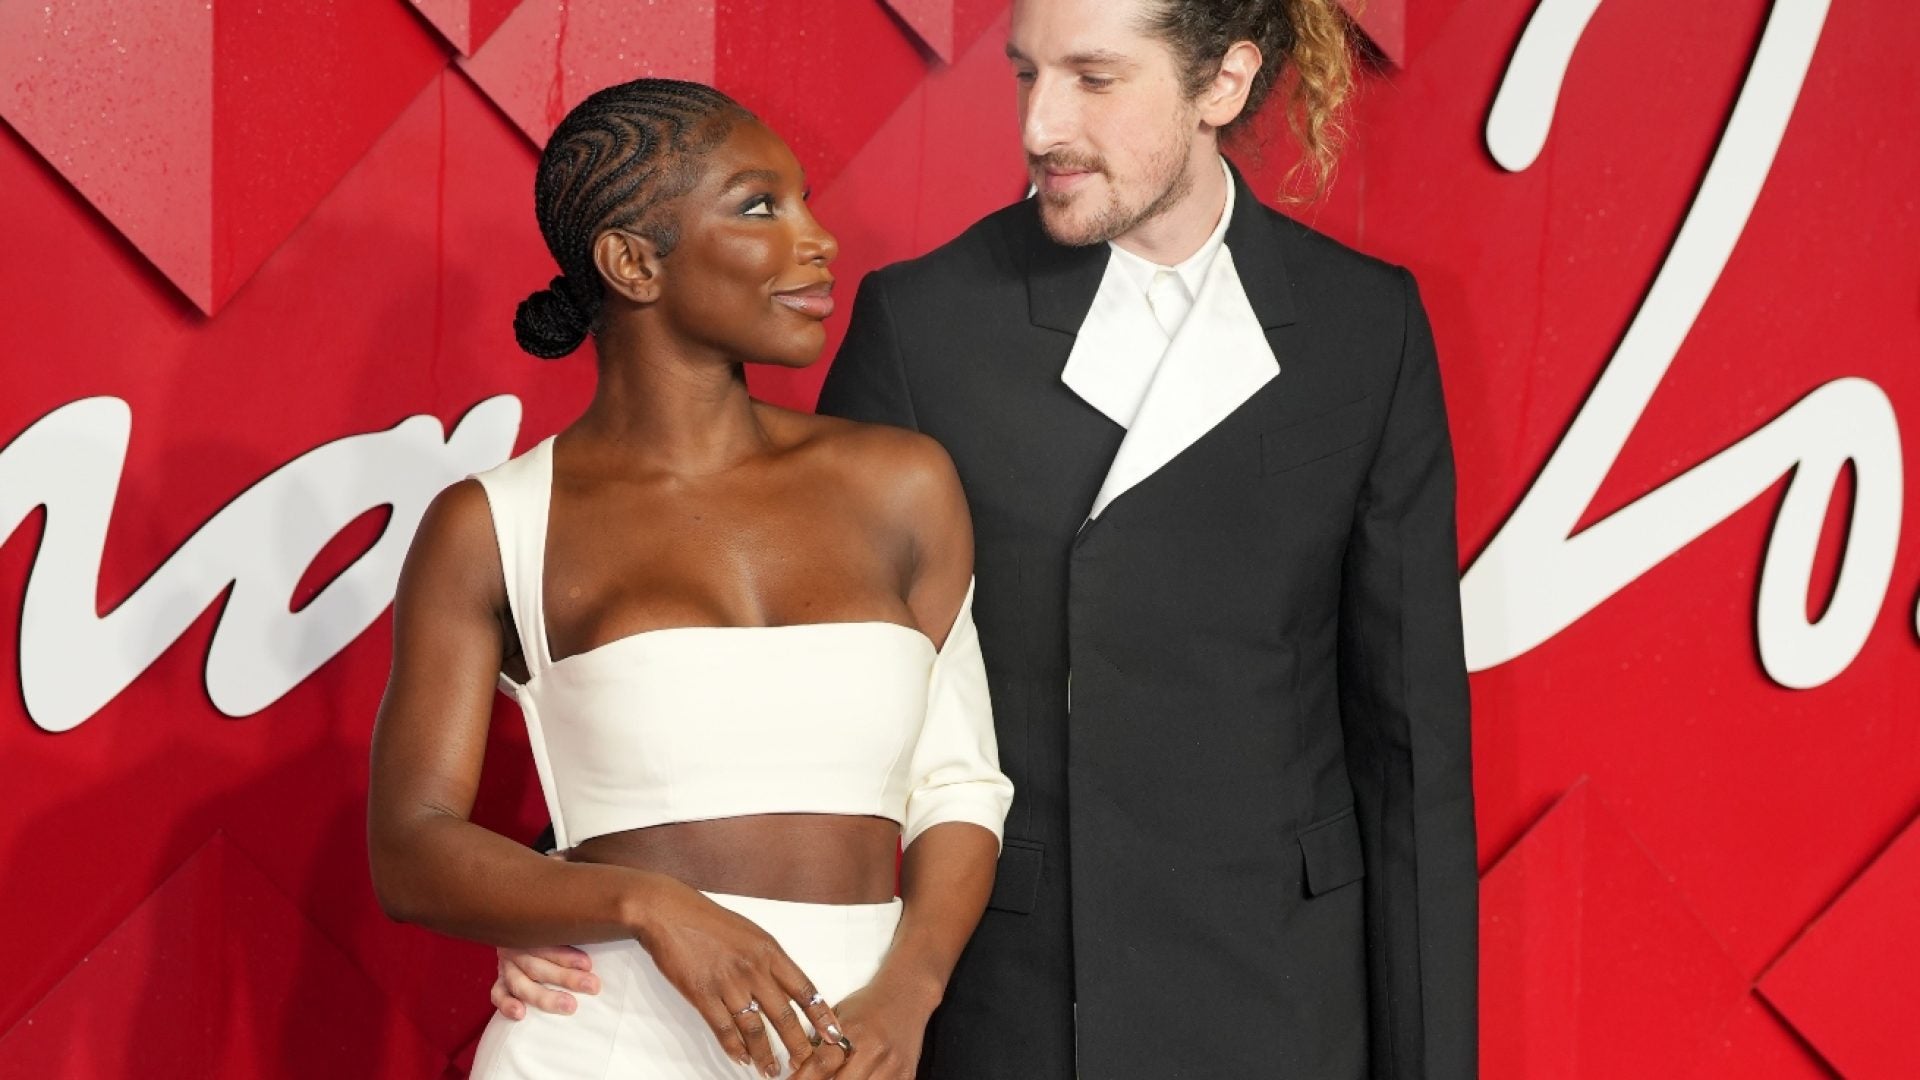 'Hard Launch': Michaela Coel And Her New Man Make Their Red Carpet Debut